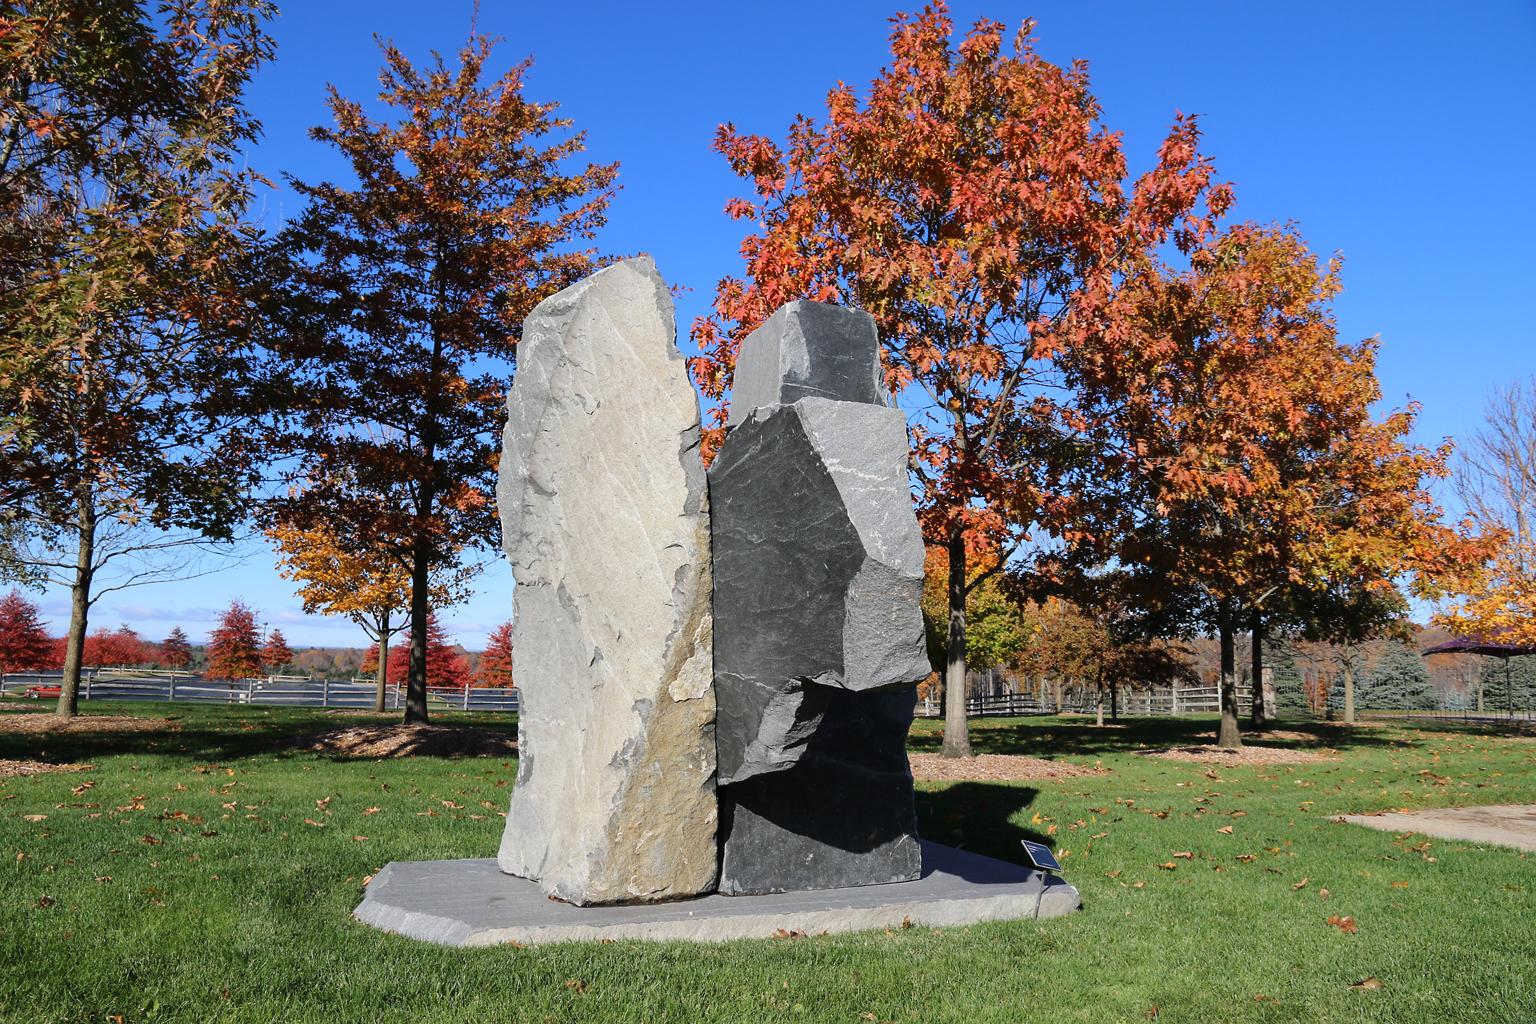 "Grasshopper", Abstract, Organic, Large-Scale Outdoor Granite Stone Sculpture